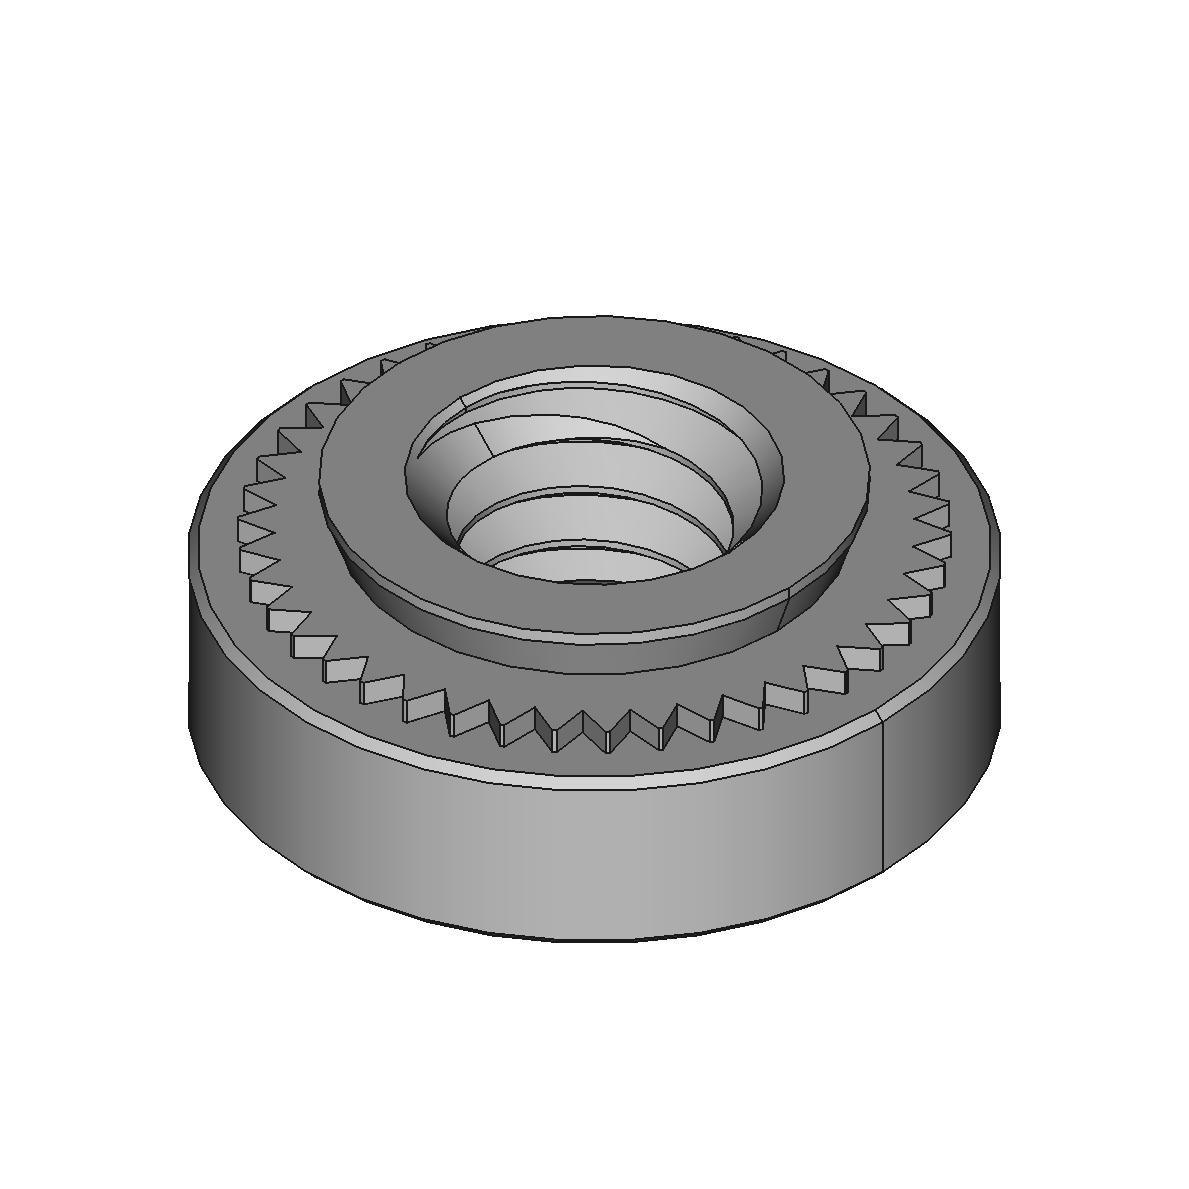 Metric Stainless Steel Press-Fit Nuts for Soft Metal and Plastic